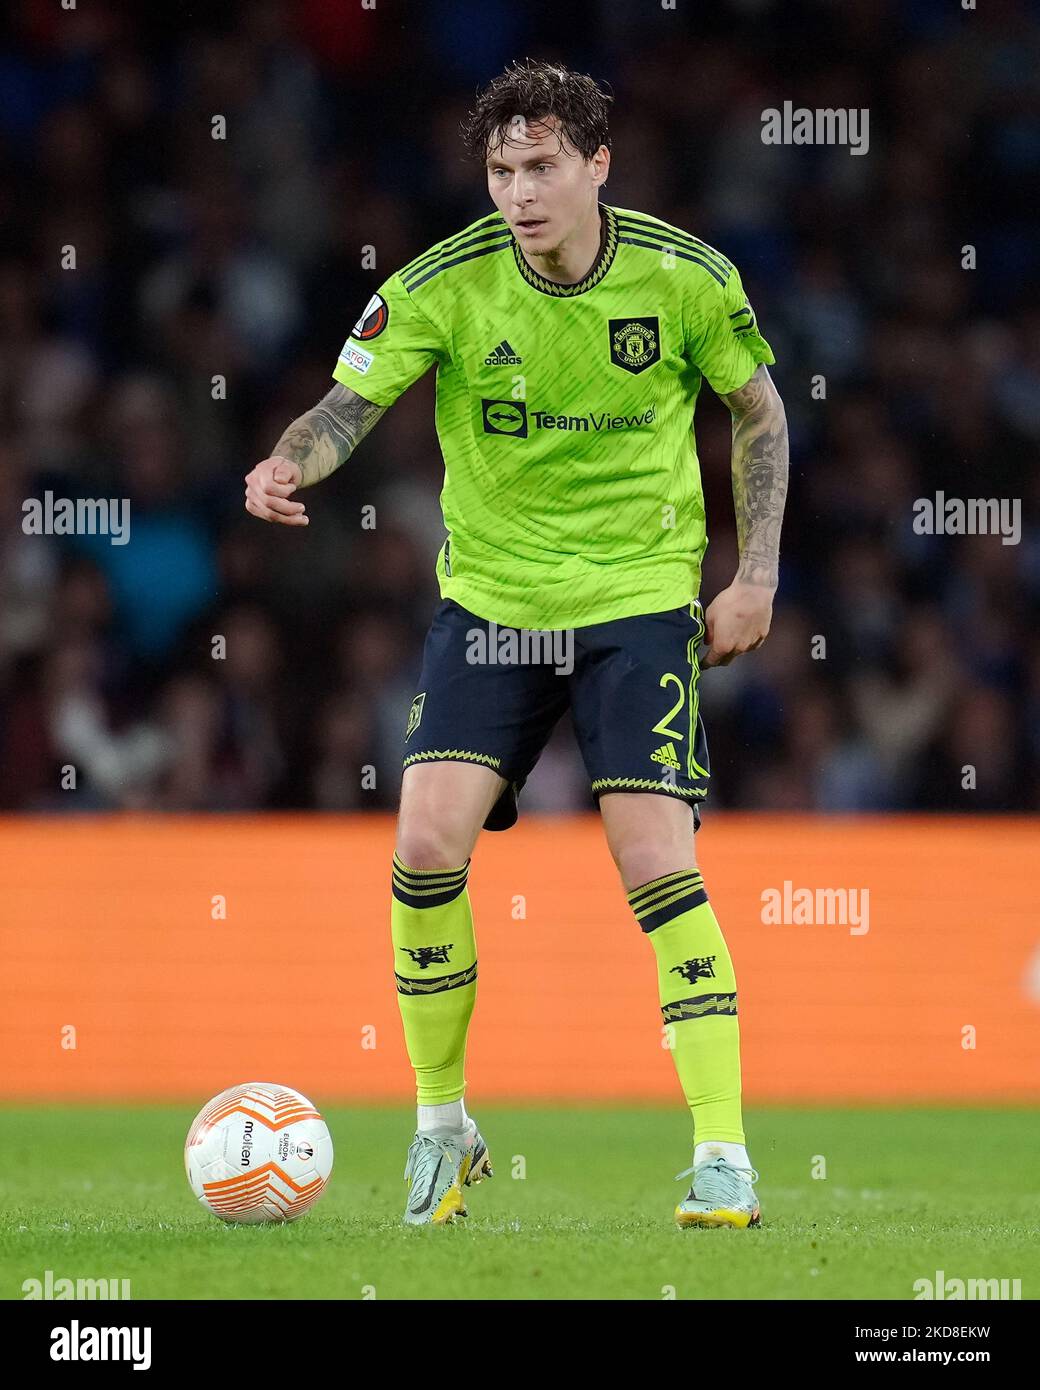 Victor Lindelof of Manchester United during the UEFA Europa League match between Real Sociedad and Manchester United, Group C, played at Reale Arena Stadium on November 3, 2022 in San Sebastian, Spain. (Photo by Magma / PRESSIN) Stock Photo